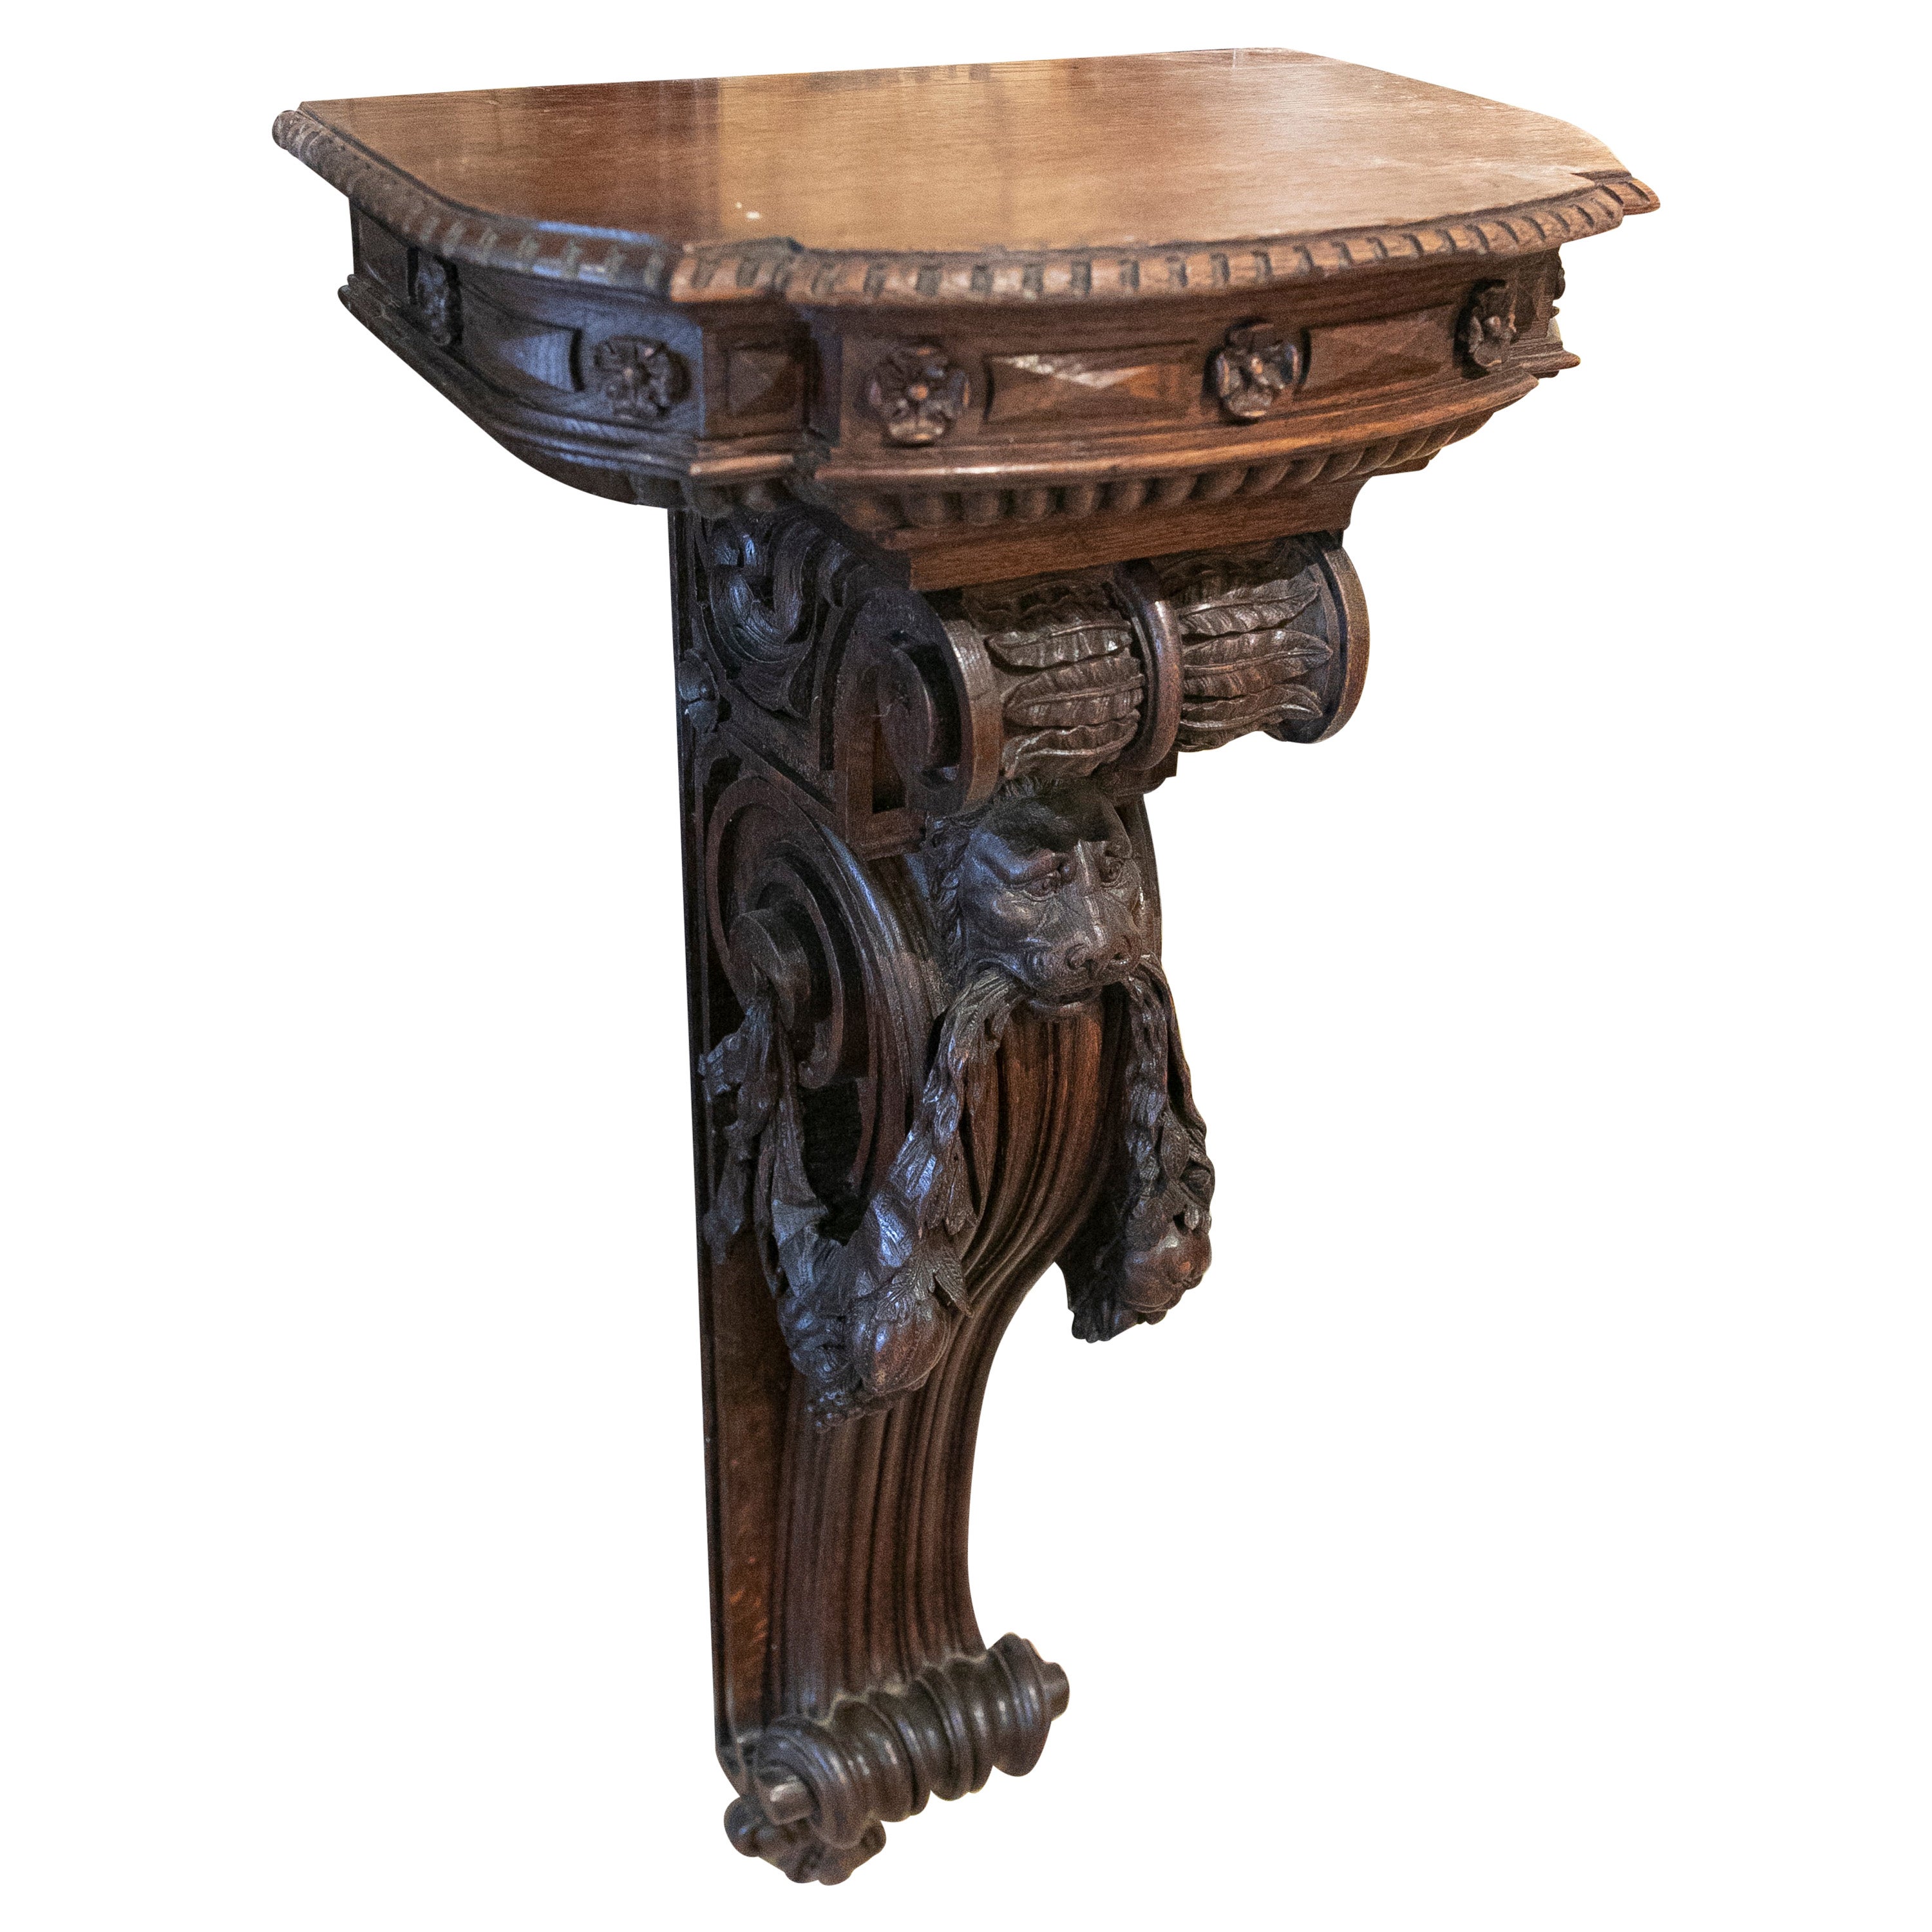 18th Century Handcarved Wooden Pedestal with a Lion, Rockwork and Fruits as Deco For Sale